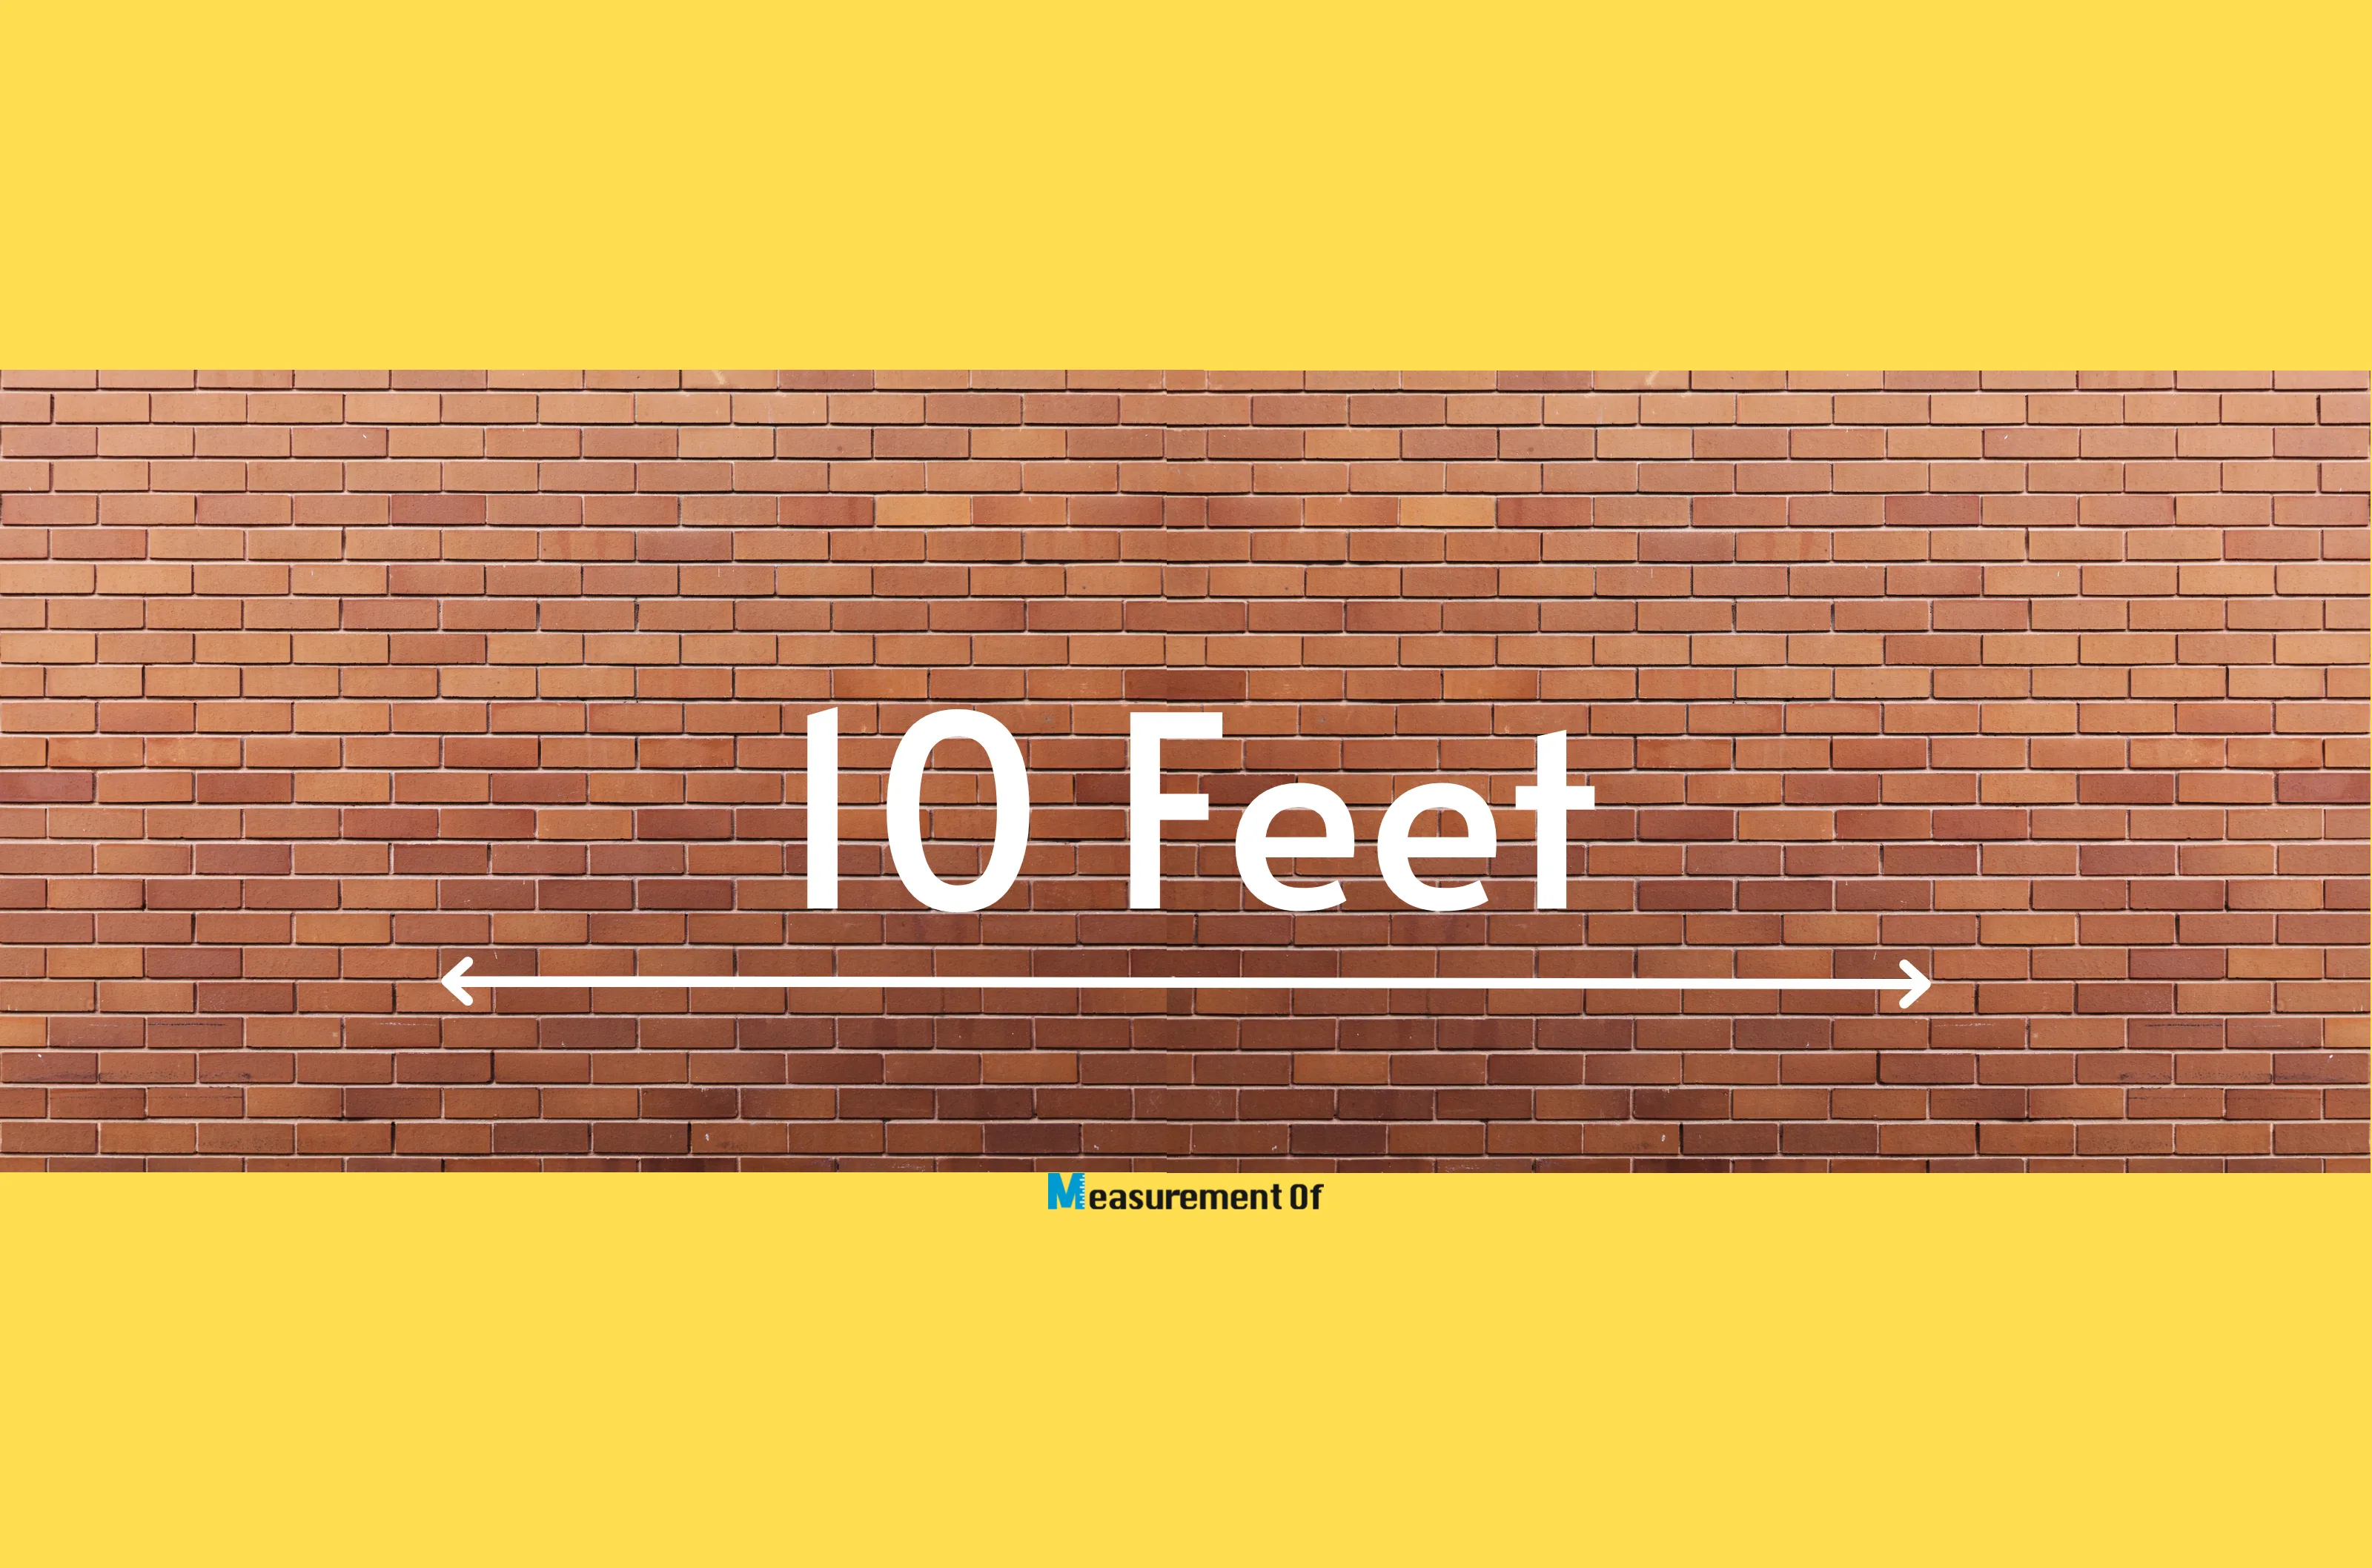 Common Things That Are 10 Feet Long blog header 1600x1058 px.webp